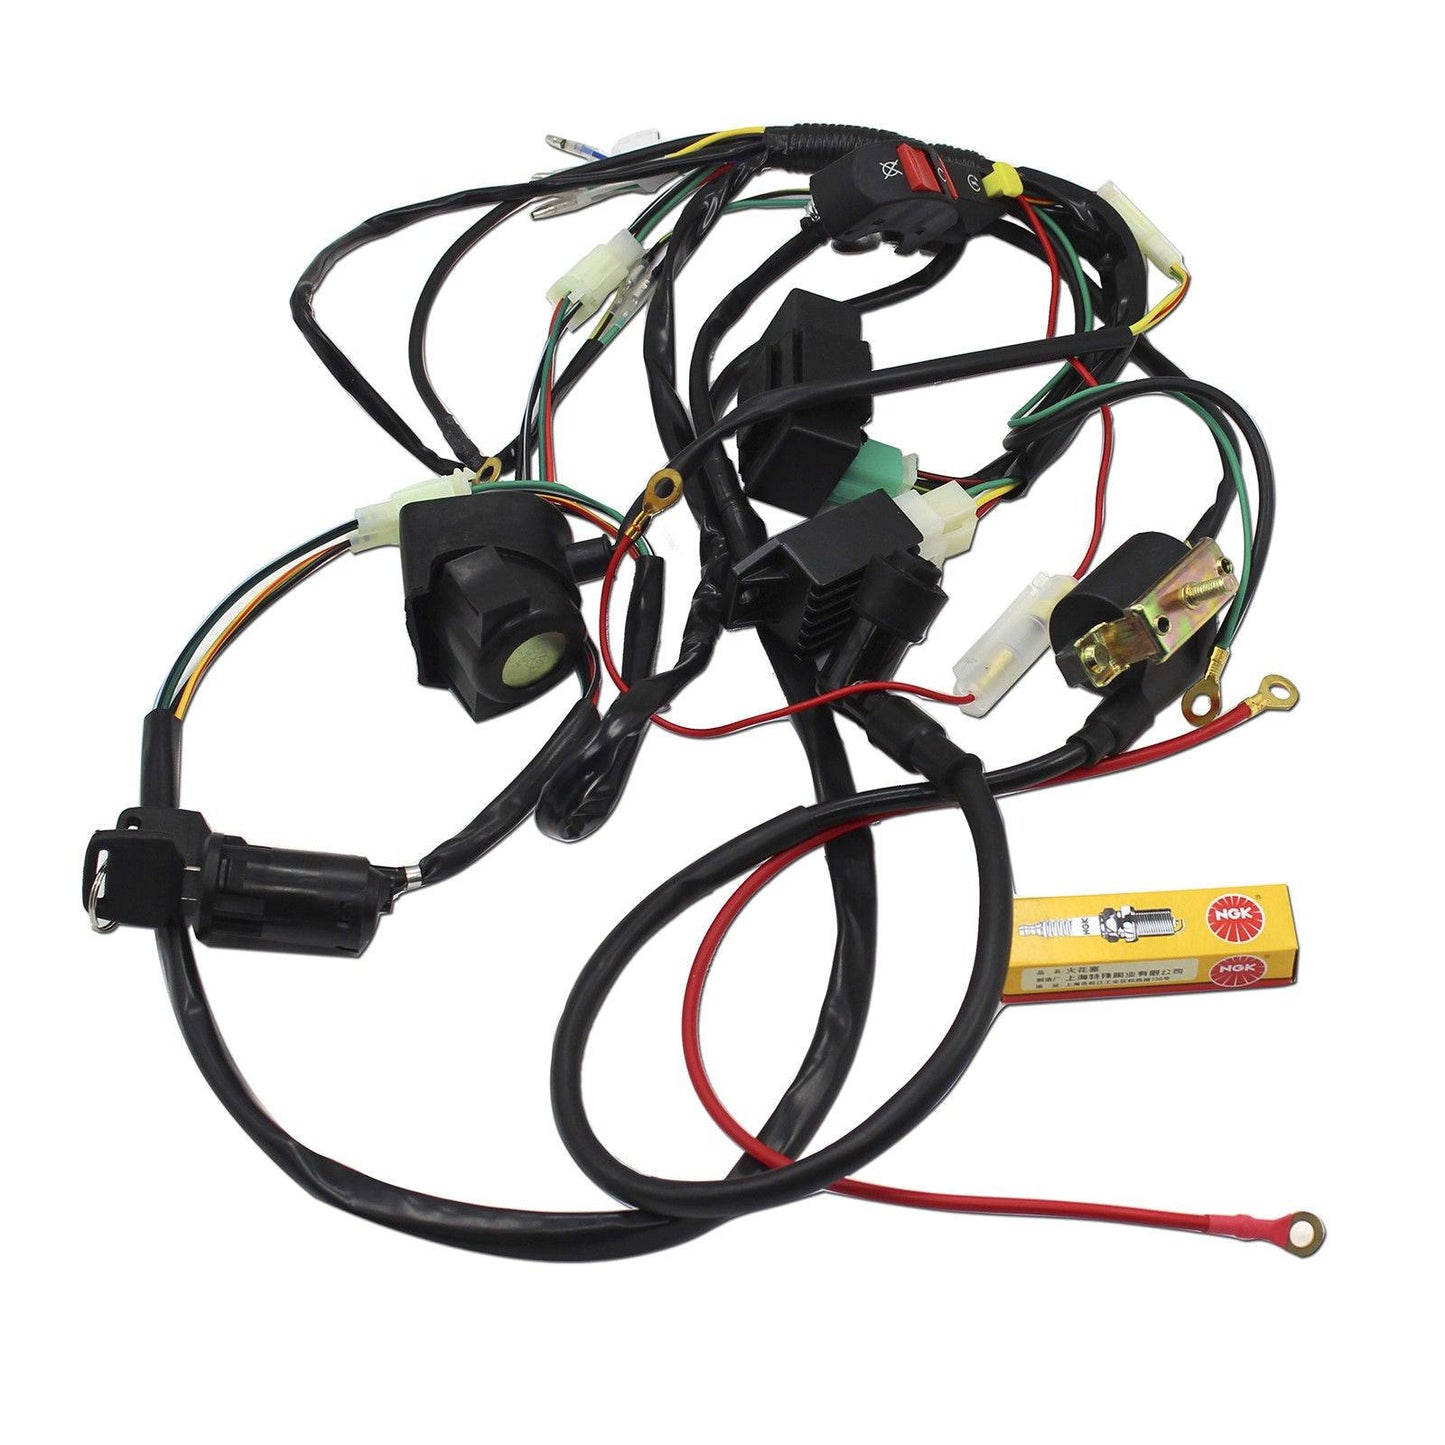 50/70/90/110/125cc 4 Stroke Engine Complete Wiring Loom Harness Thumpster Atomik - TDRMOTO